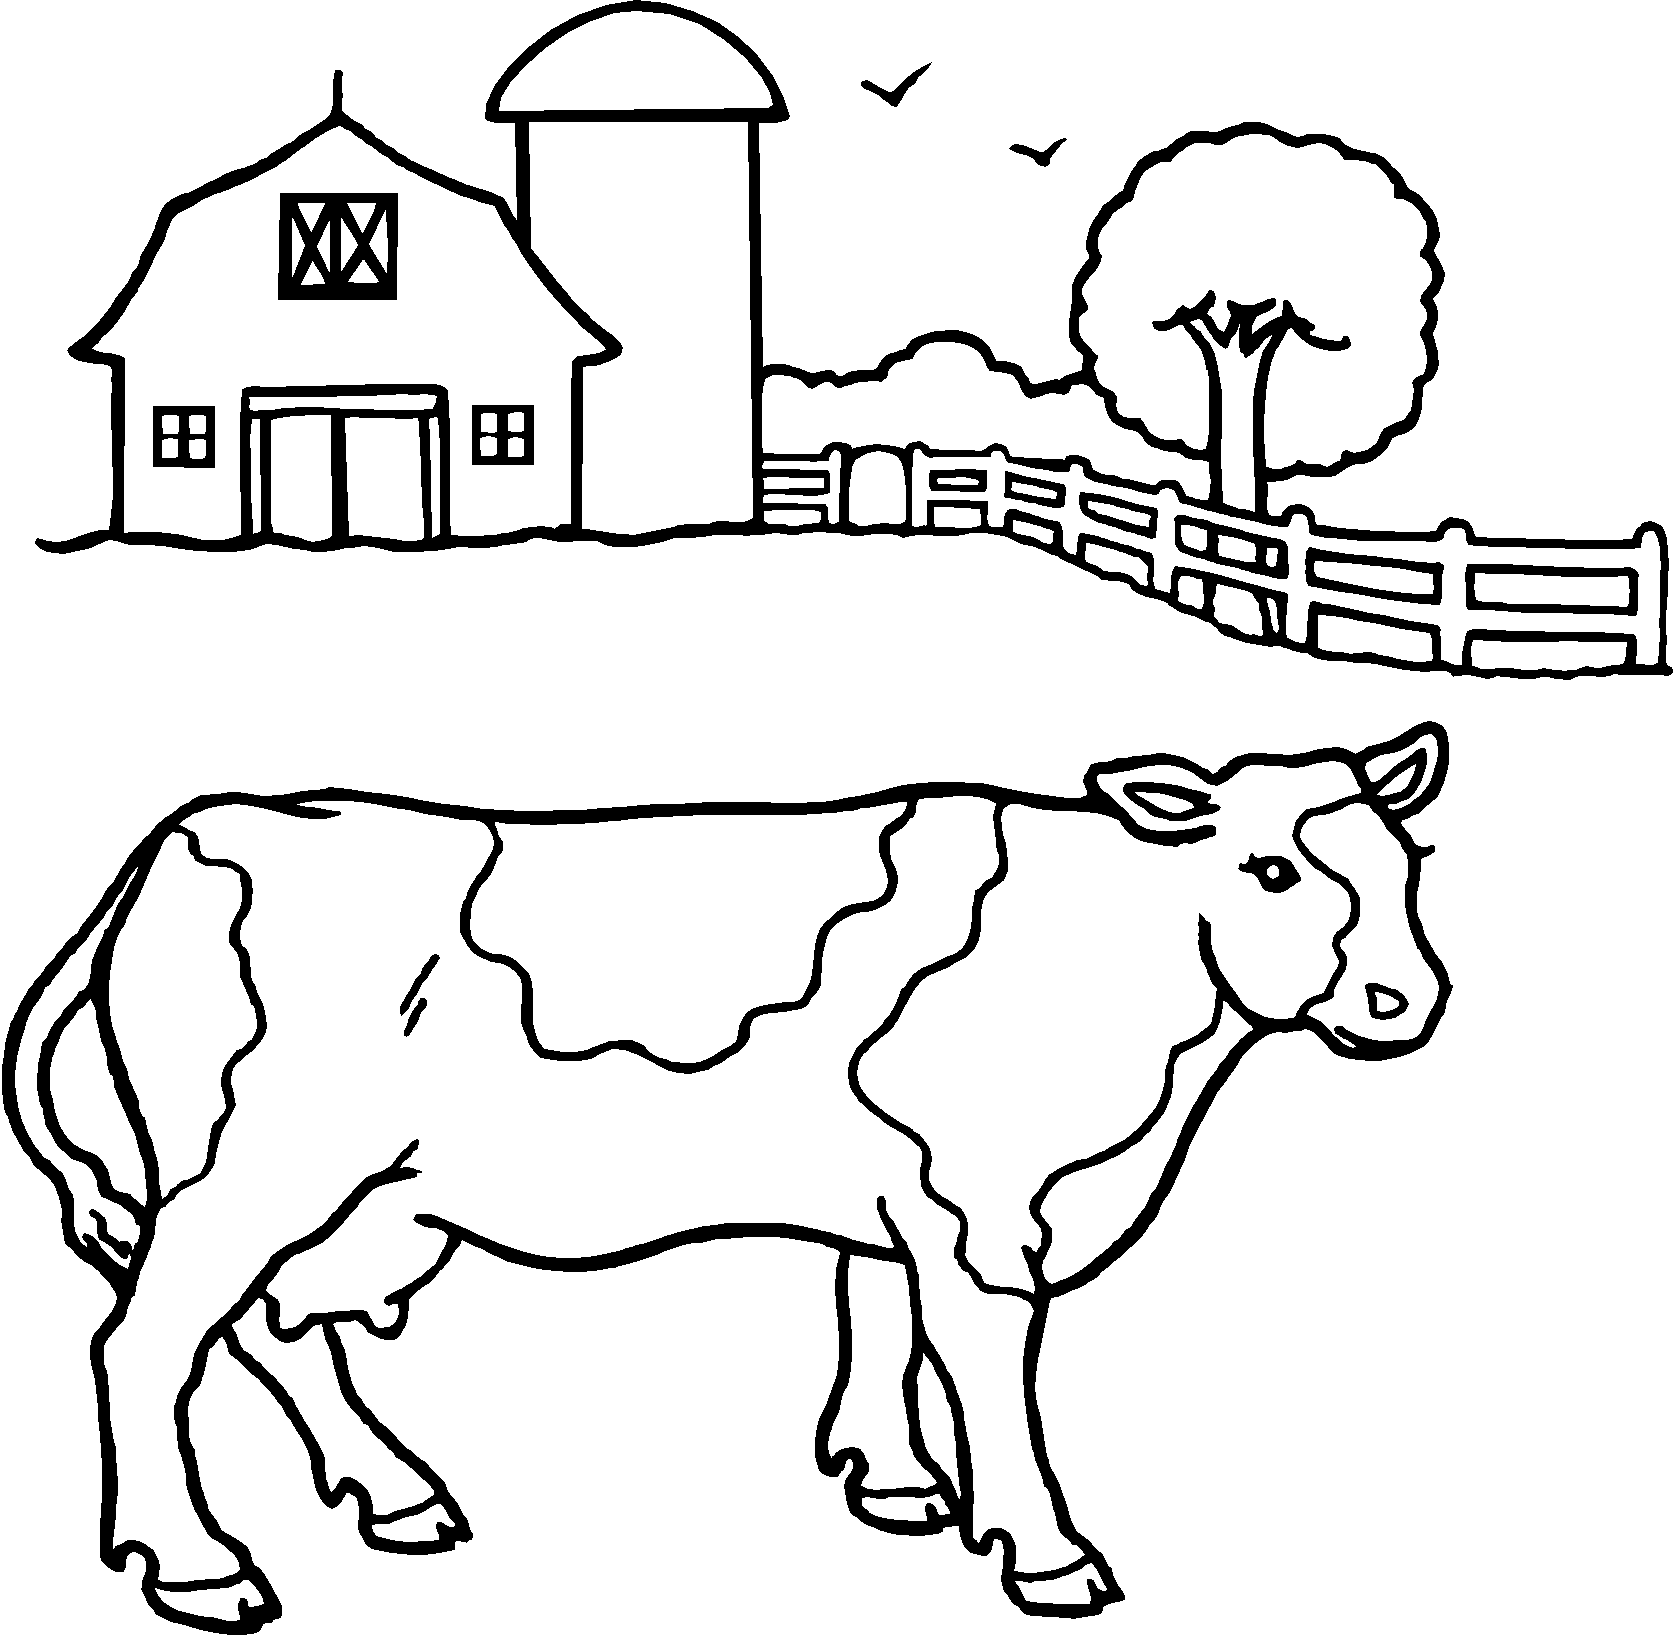 Black And White Cow Coloring Page - Coloring Pages For All Ages